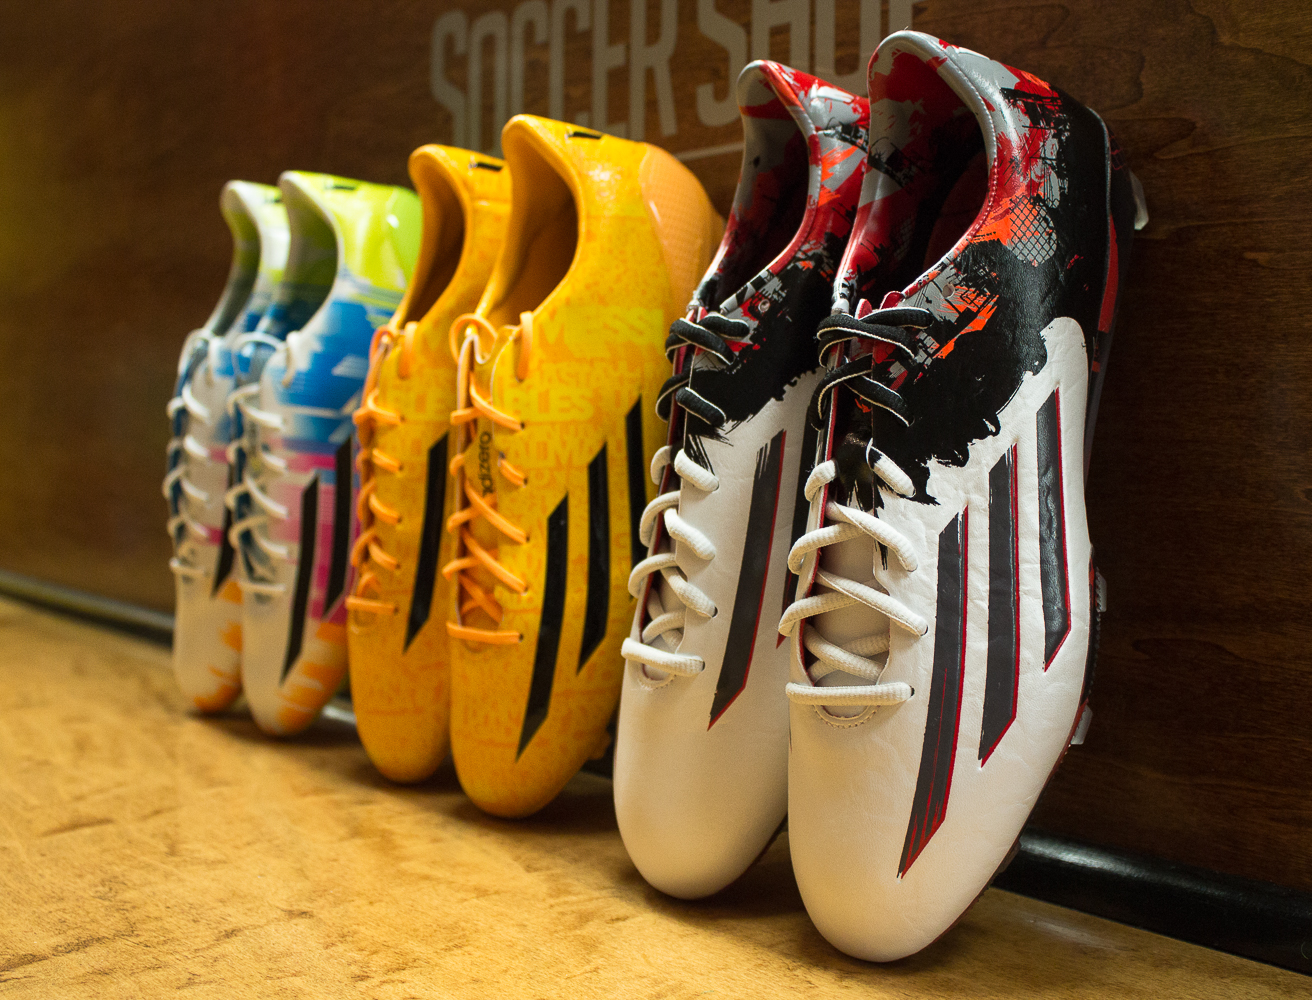 Urban Polished: Leo Messi Release Pibe De Barr10 Boot — Soccer City Sports Center